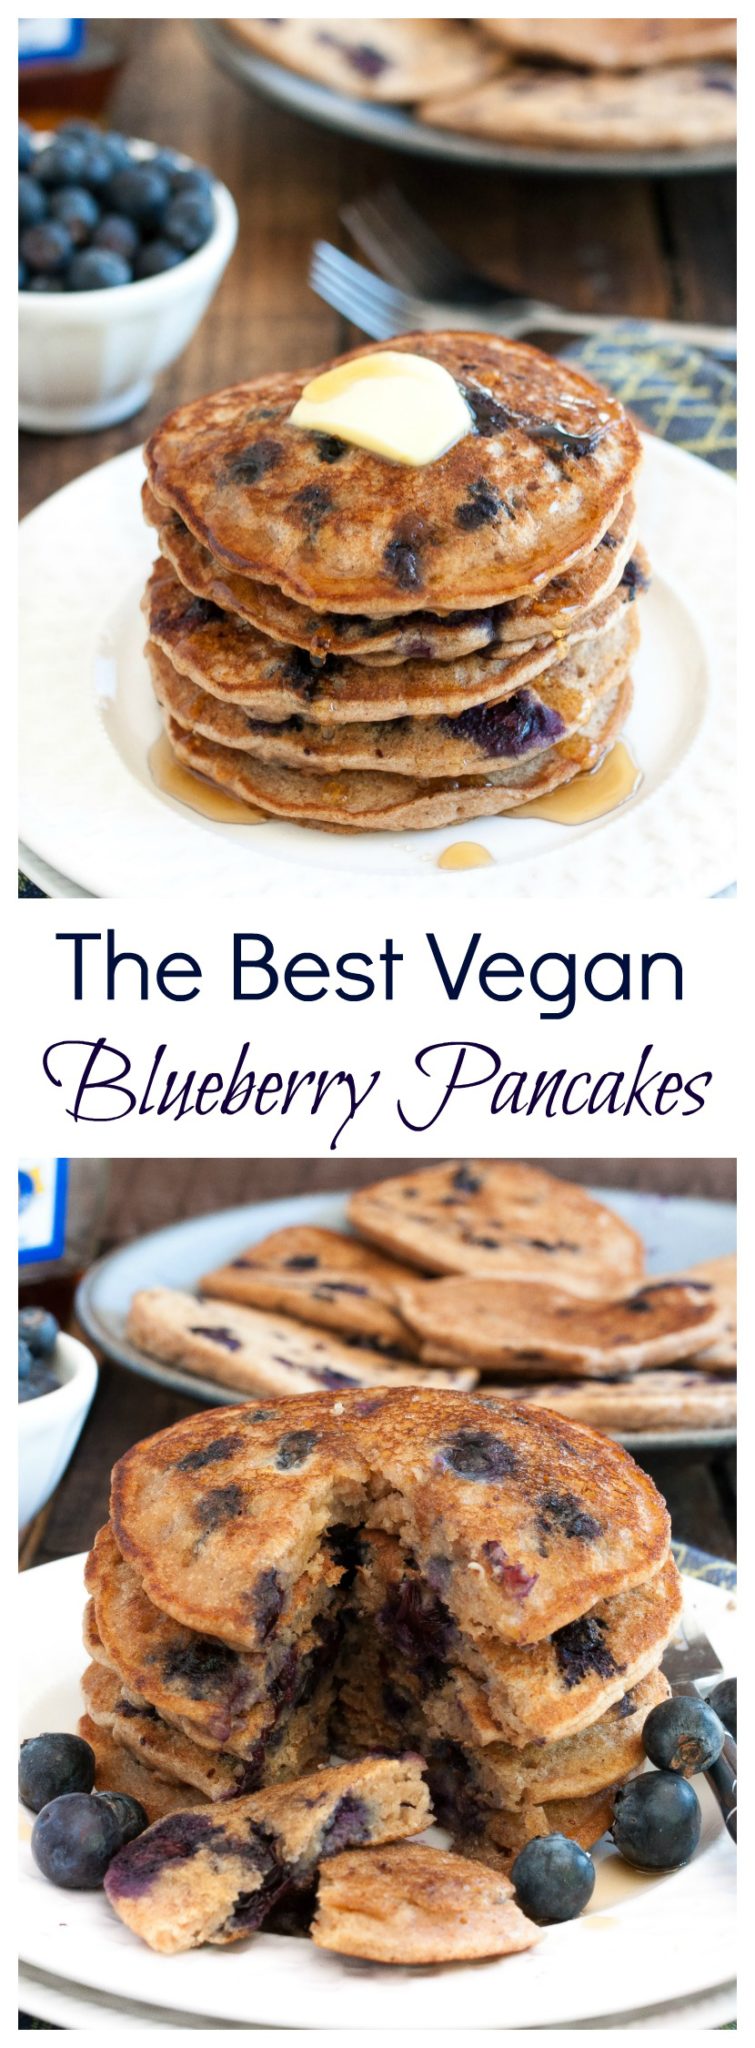 Vegan Blueberry Pancakes- simple, delicious and no egg needed! | www.nutritiouseats.com